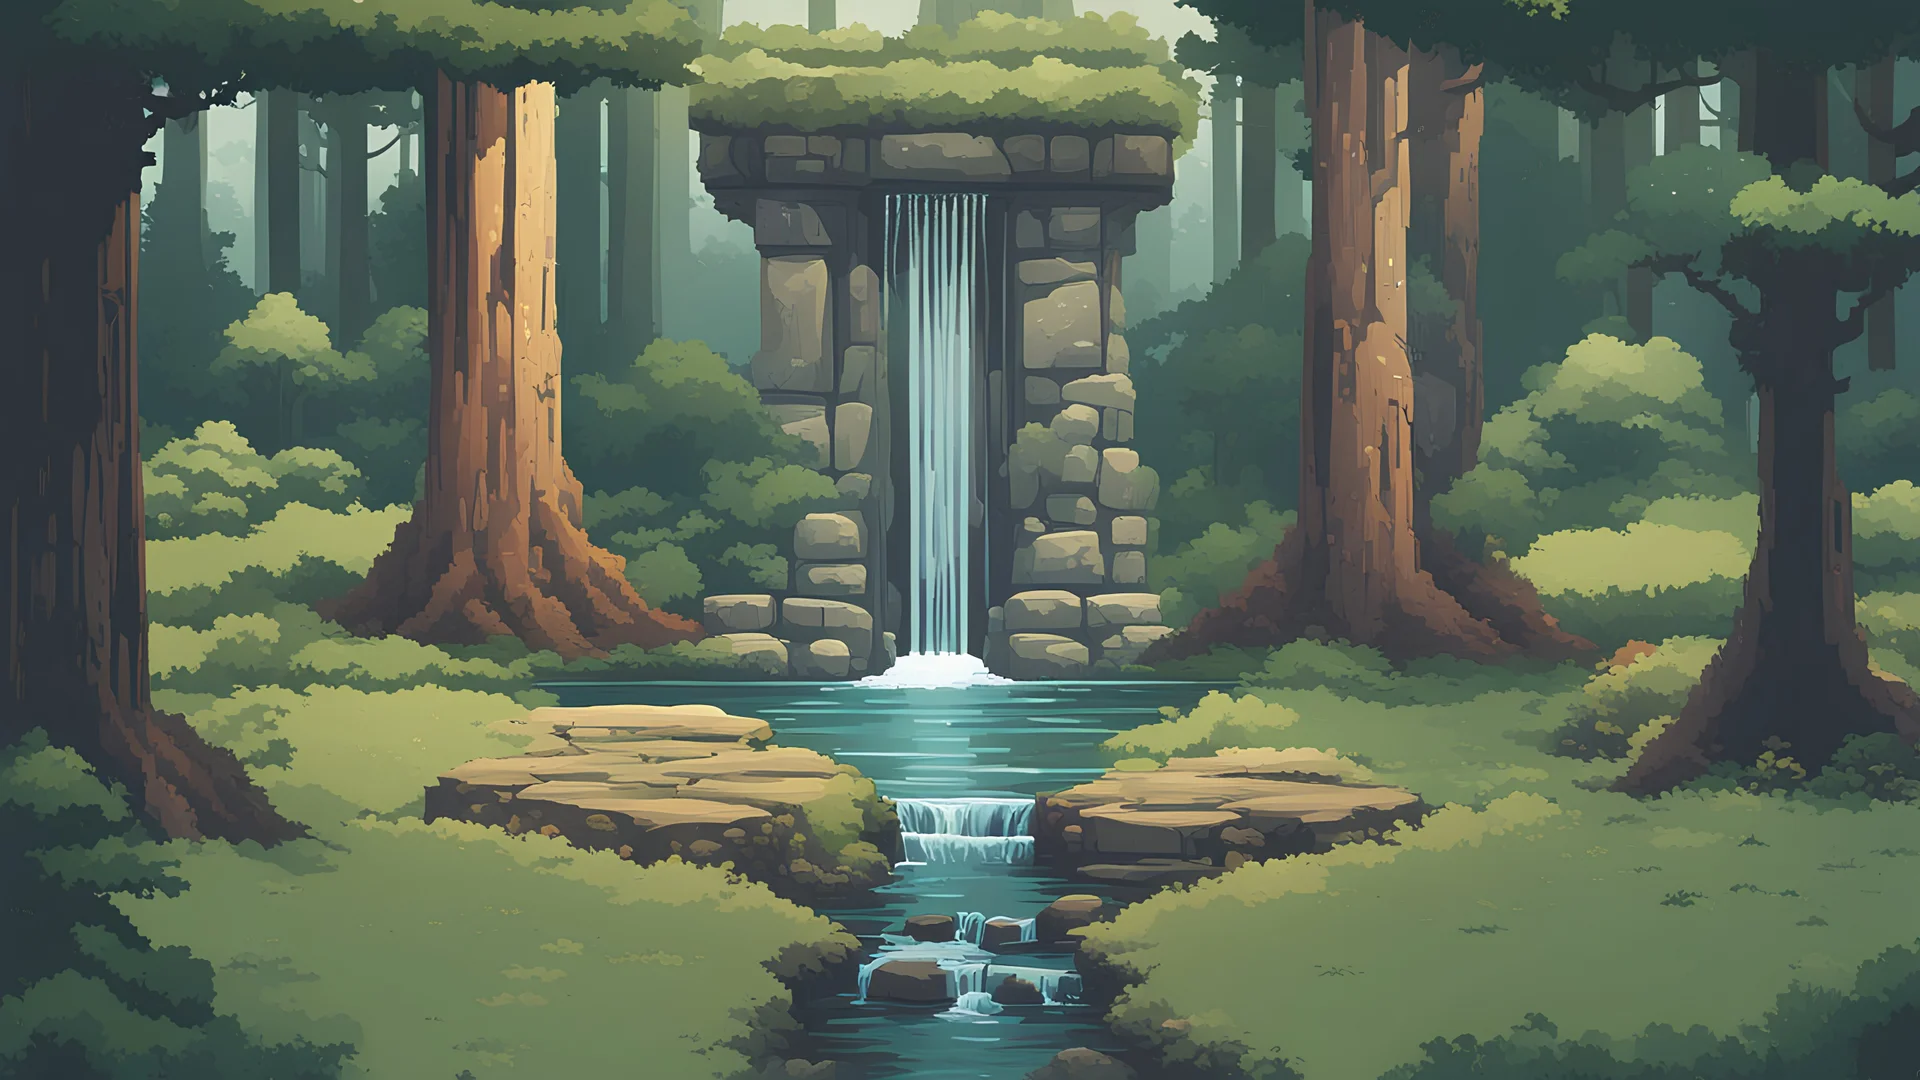 The video game poster presents a serene forest scene in Irland in minimalist pixel art, capturing the essence of the Celtic landscape. A solitary dolmen stands amidst a sea of lush green trees, its ancient stones rendered in simple yet evocative detail. Shafts of sunlight filter through the canopy, casting dappled patterns on the forest floor. fountain with faeries